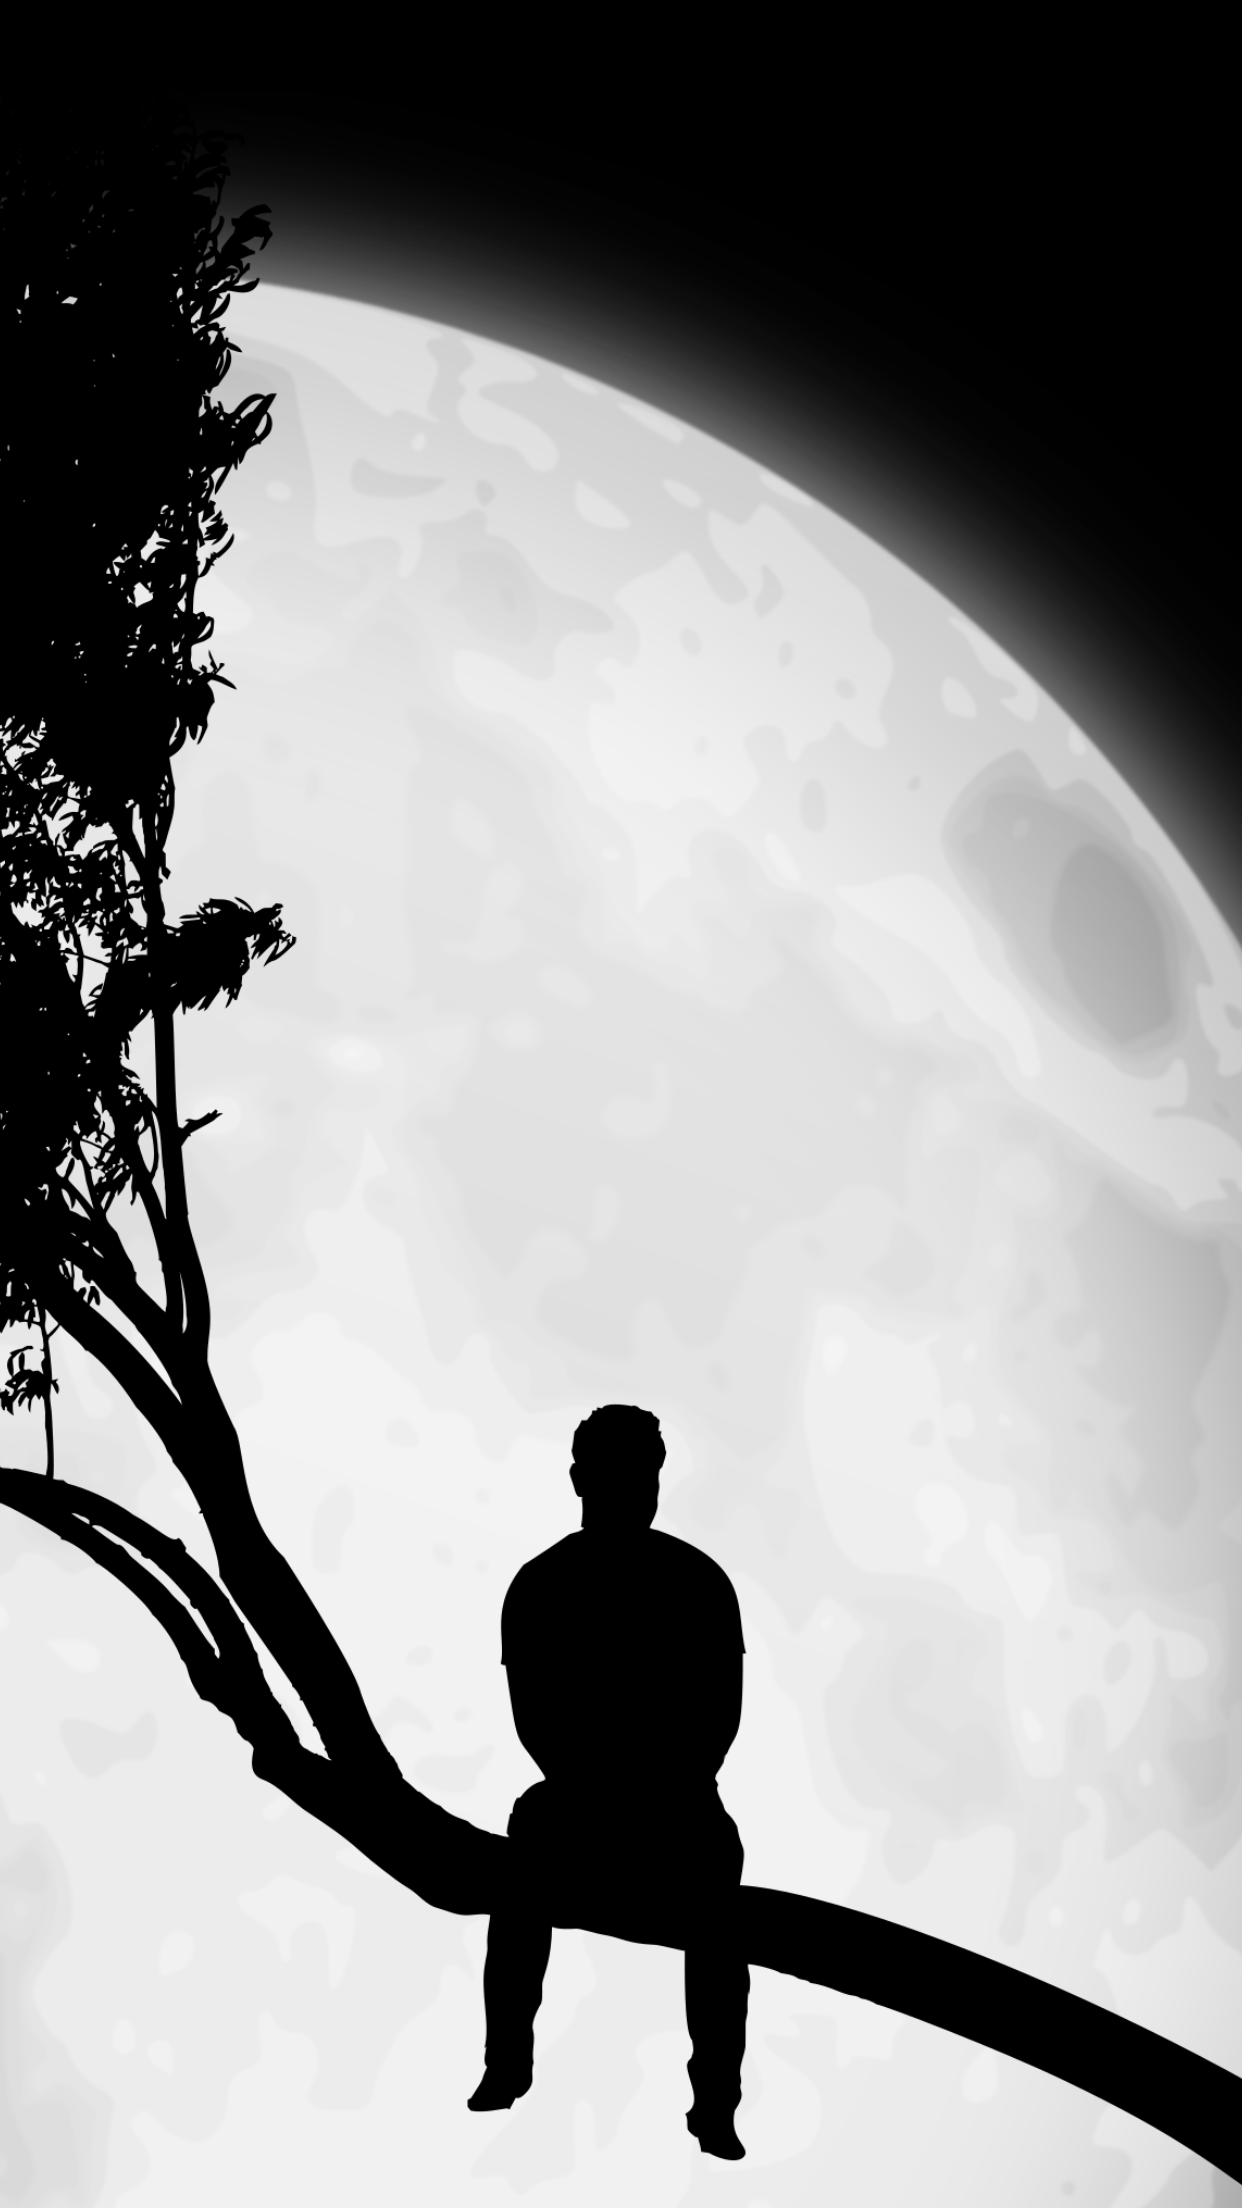 Alone with moon. Alone art, Lonely art, Alone boy wallpaper